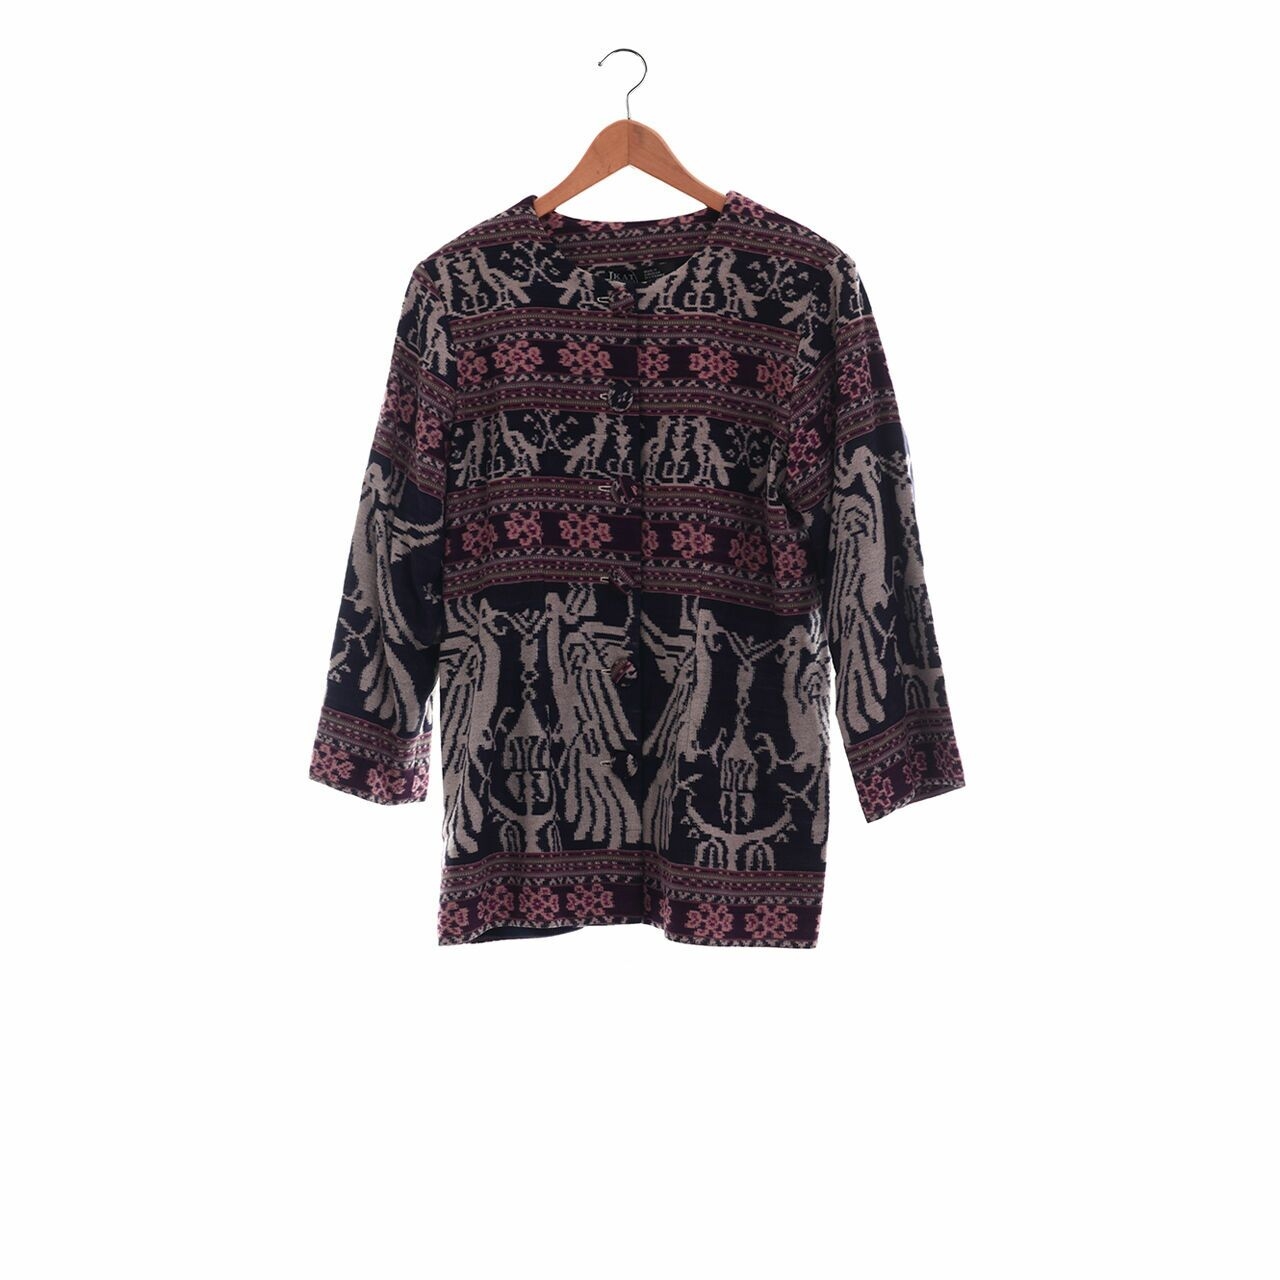 Ikat Indonesia By. Didiet Maulana Multicolor Patterned Blouse